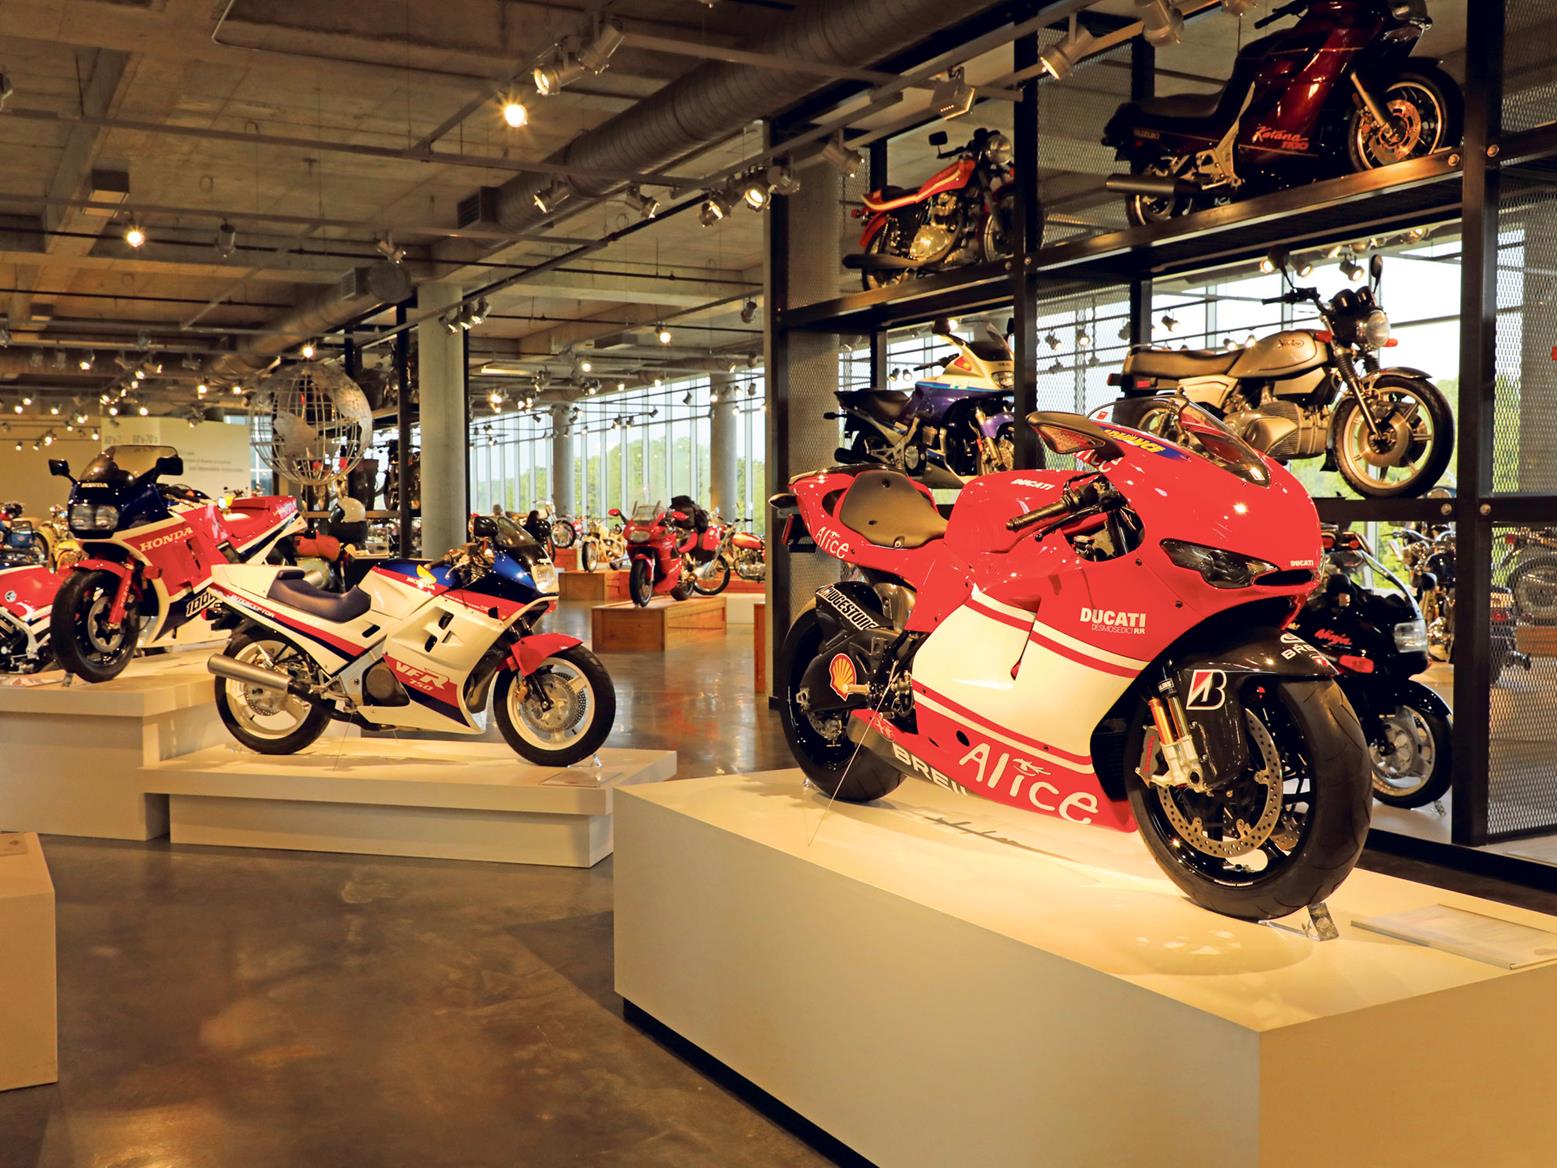 A glimpse at "motorcycling mecca" - the Barber Vintage Motorsports